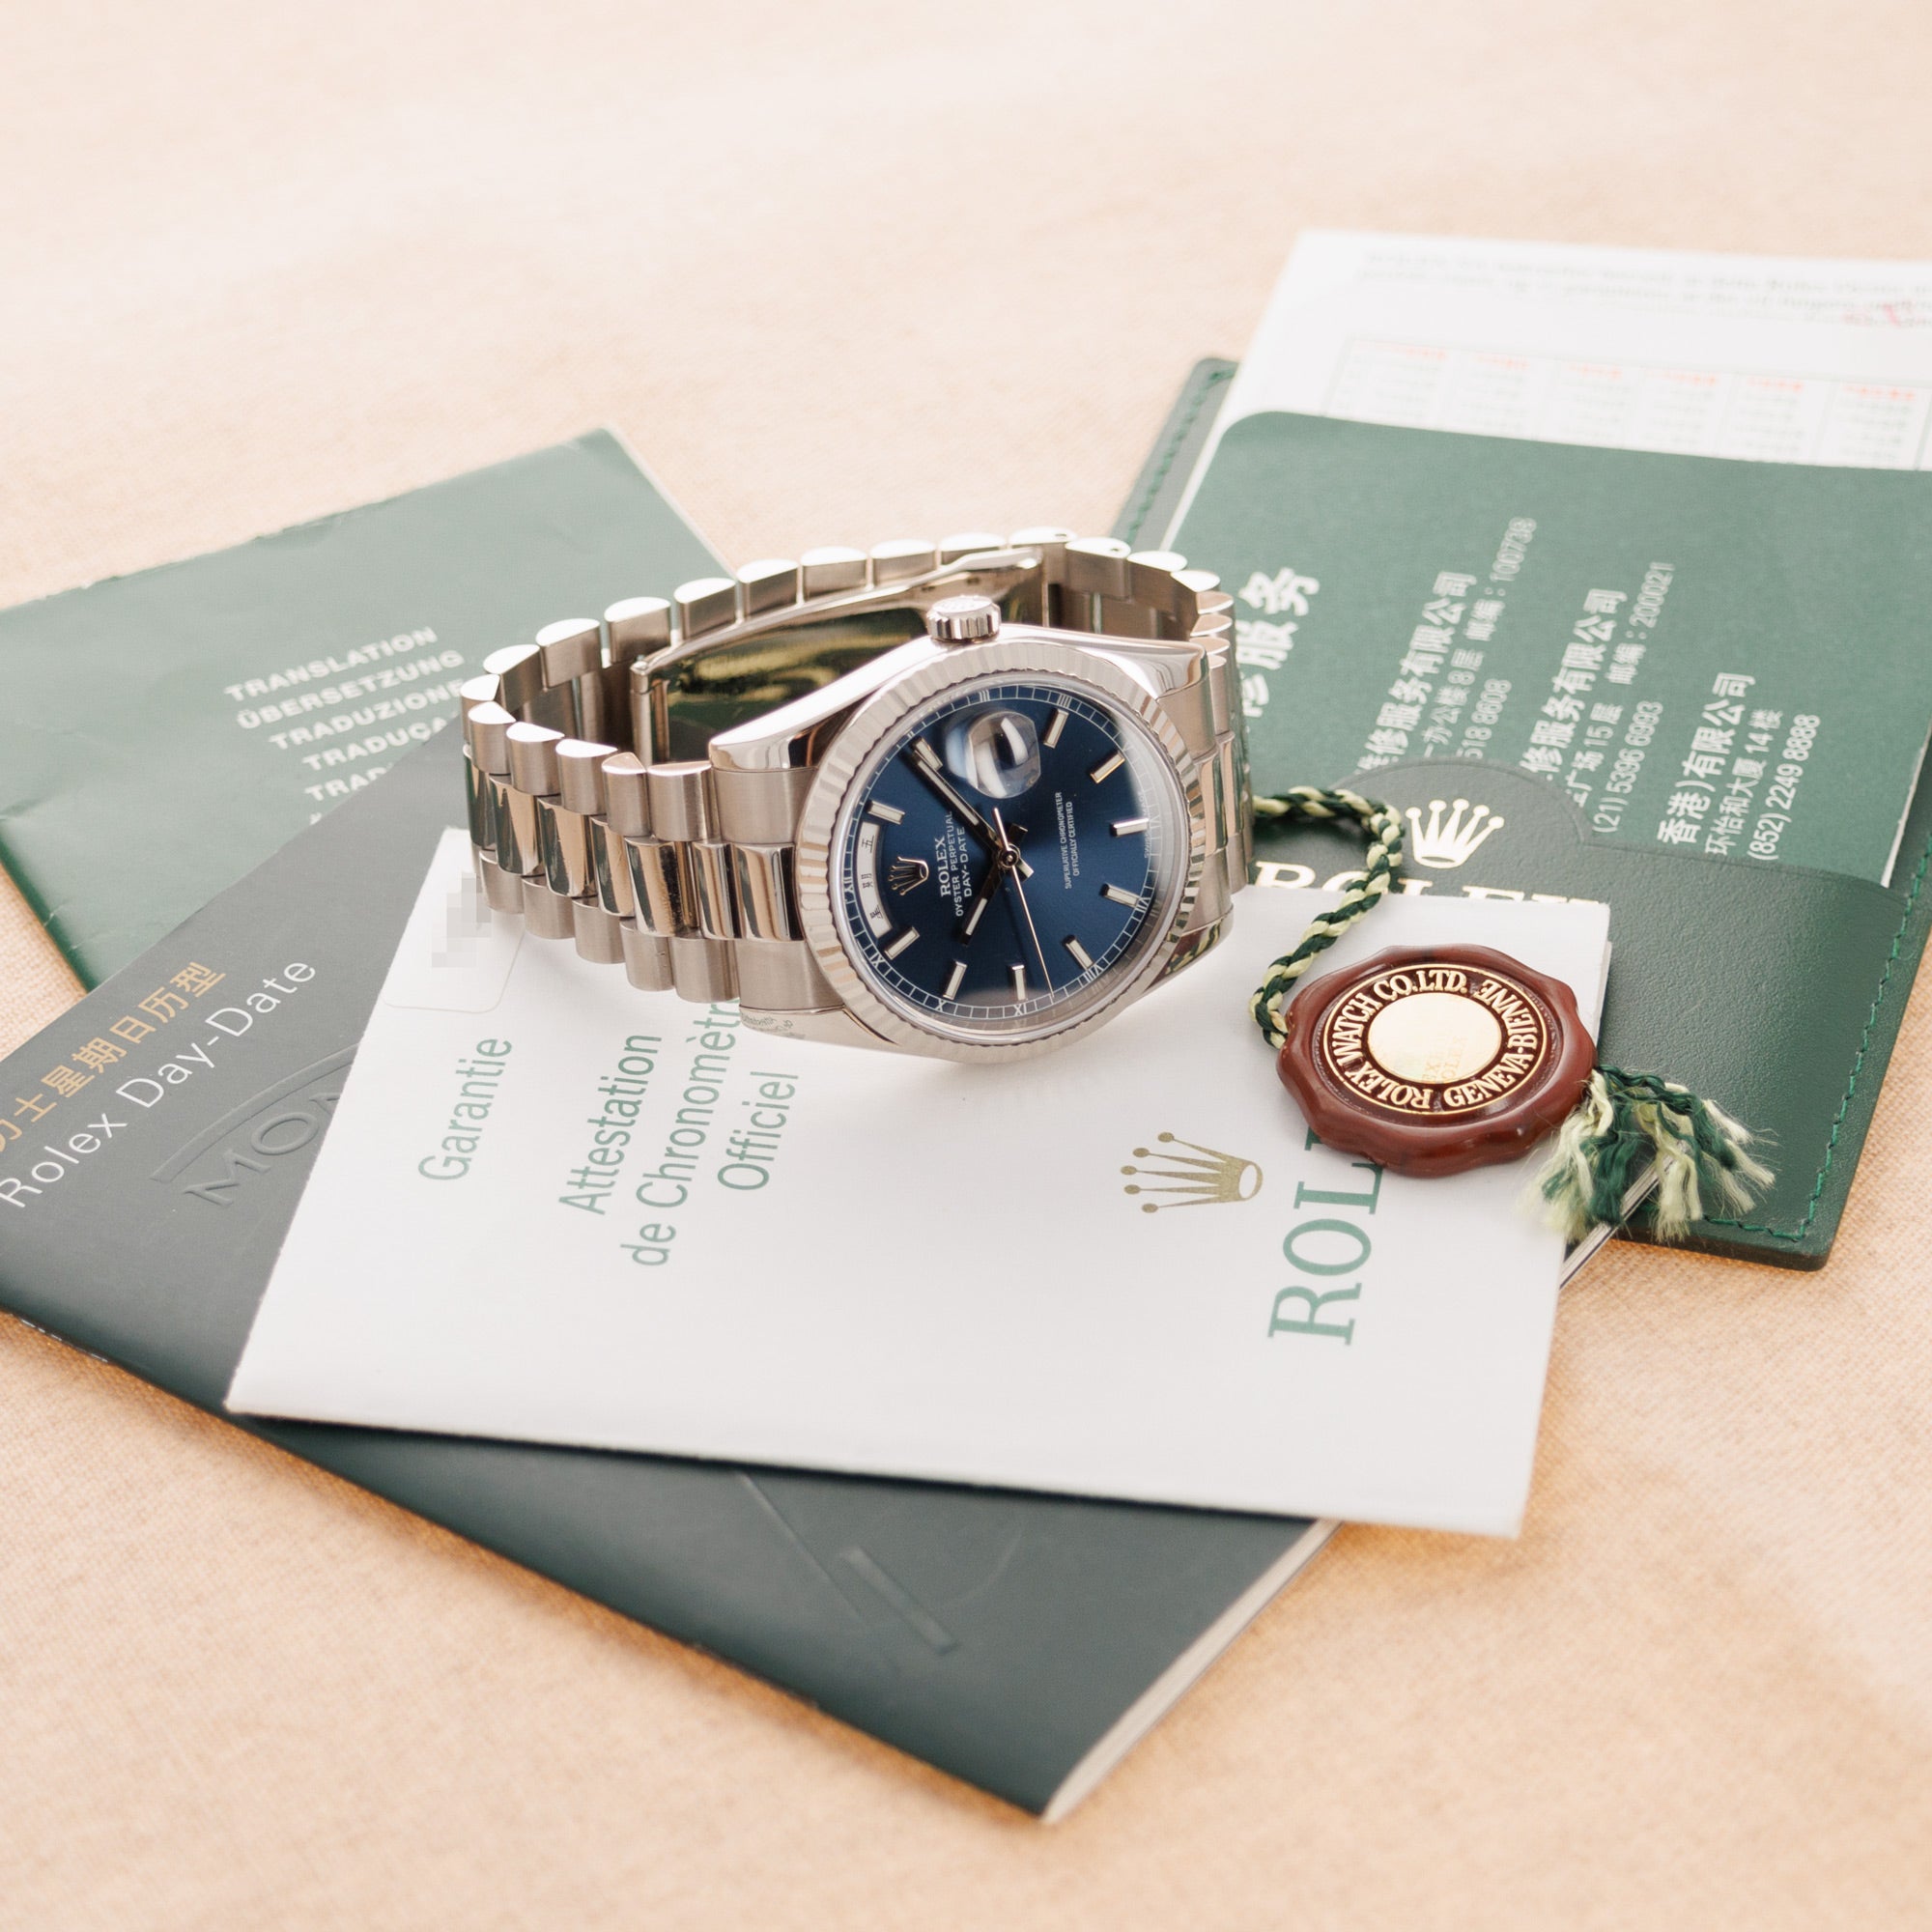 Rolex - Rolex White Gold Day Date Ref. 118239 with Blue Dial and Chinese Date - The Keystone Watches